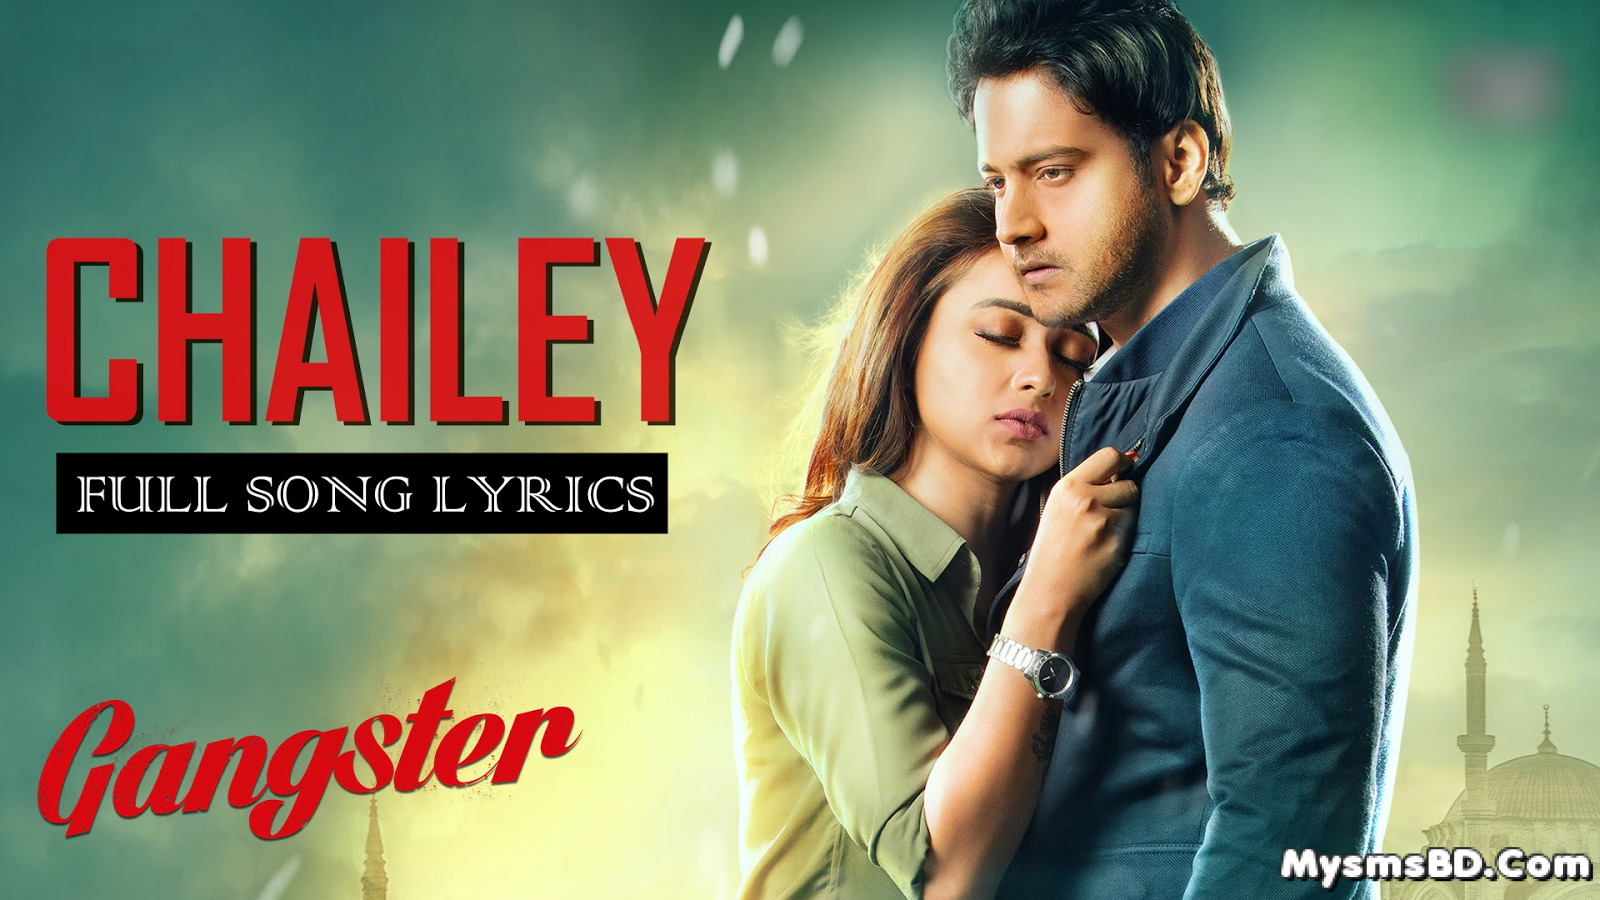 CHAILEY LYRICS - Gangster Song by Arindam Chatterjee